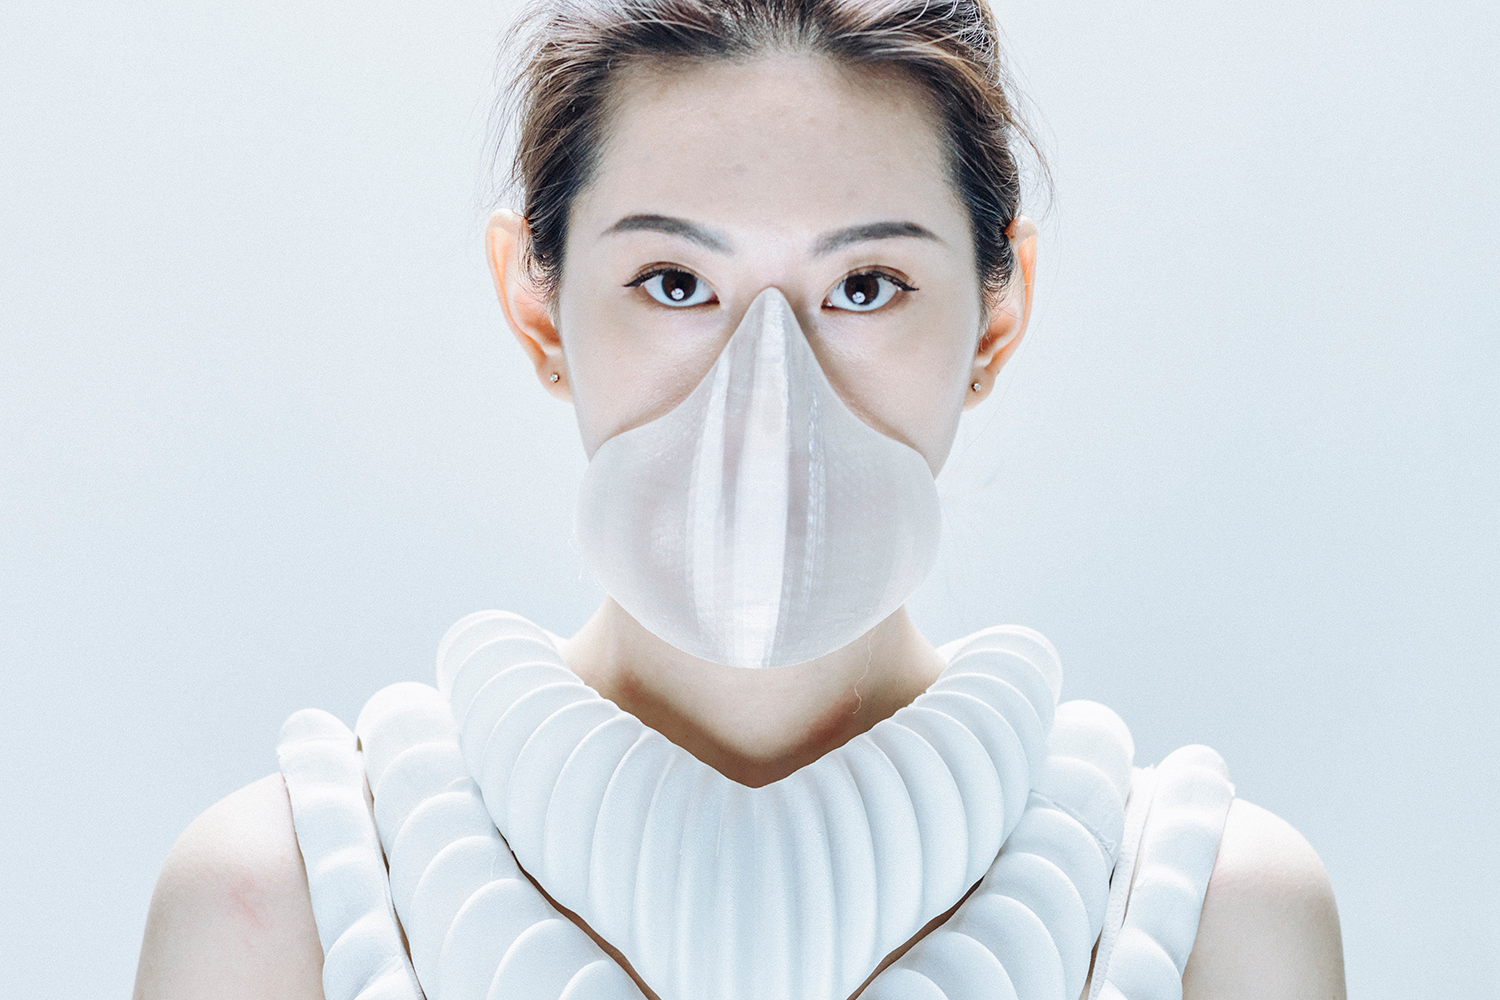 amphibio gills are designed to let humans breathe underwater gallery 3